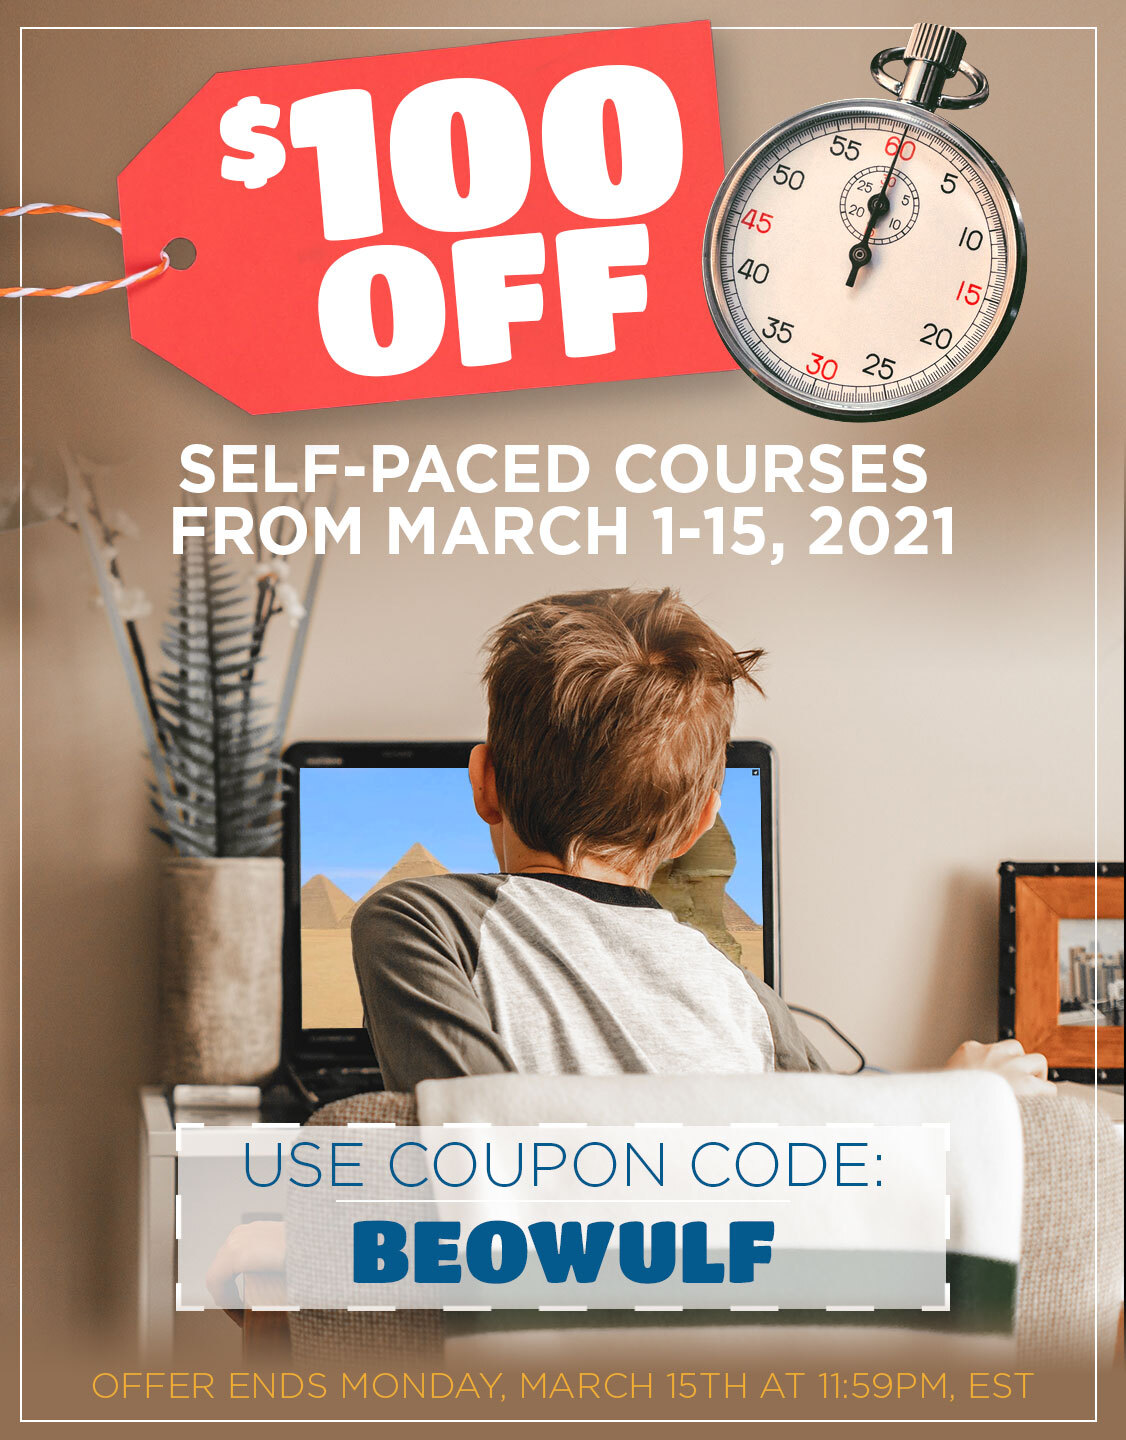 $100 OFF Self-Paced, through 3/15/21